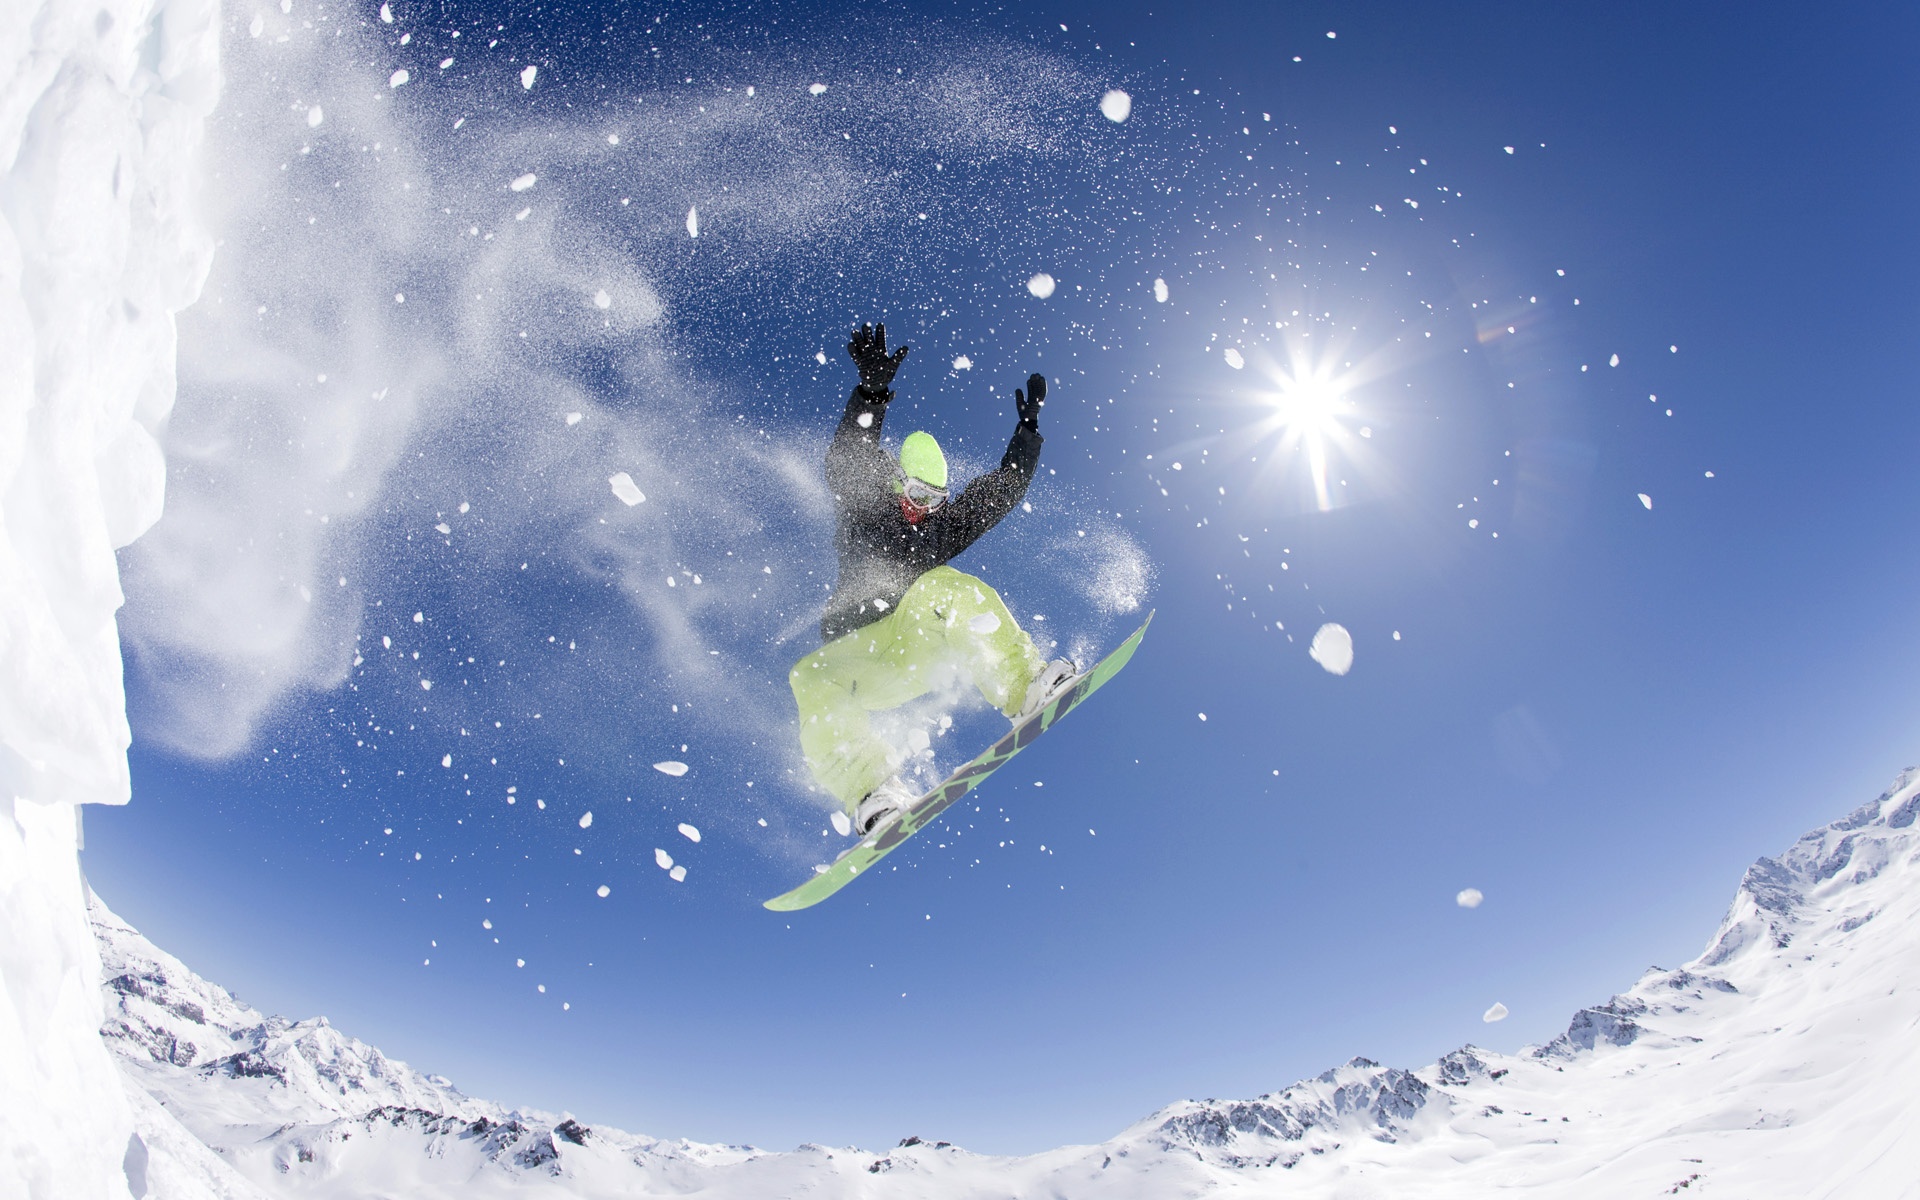 64 Snowboarding HD Wallpapers Backgrounds - Wallpaper Abyss -